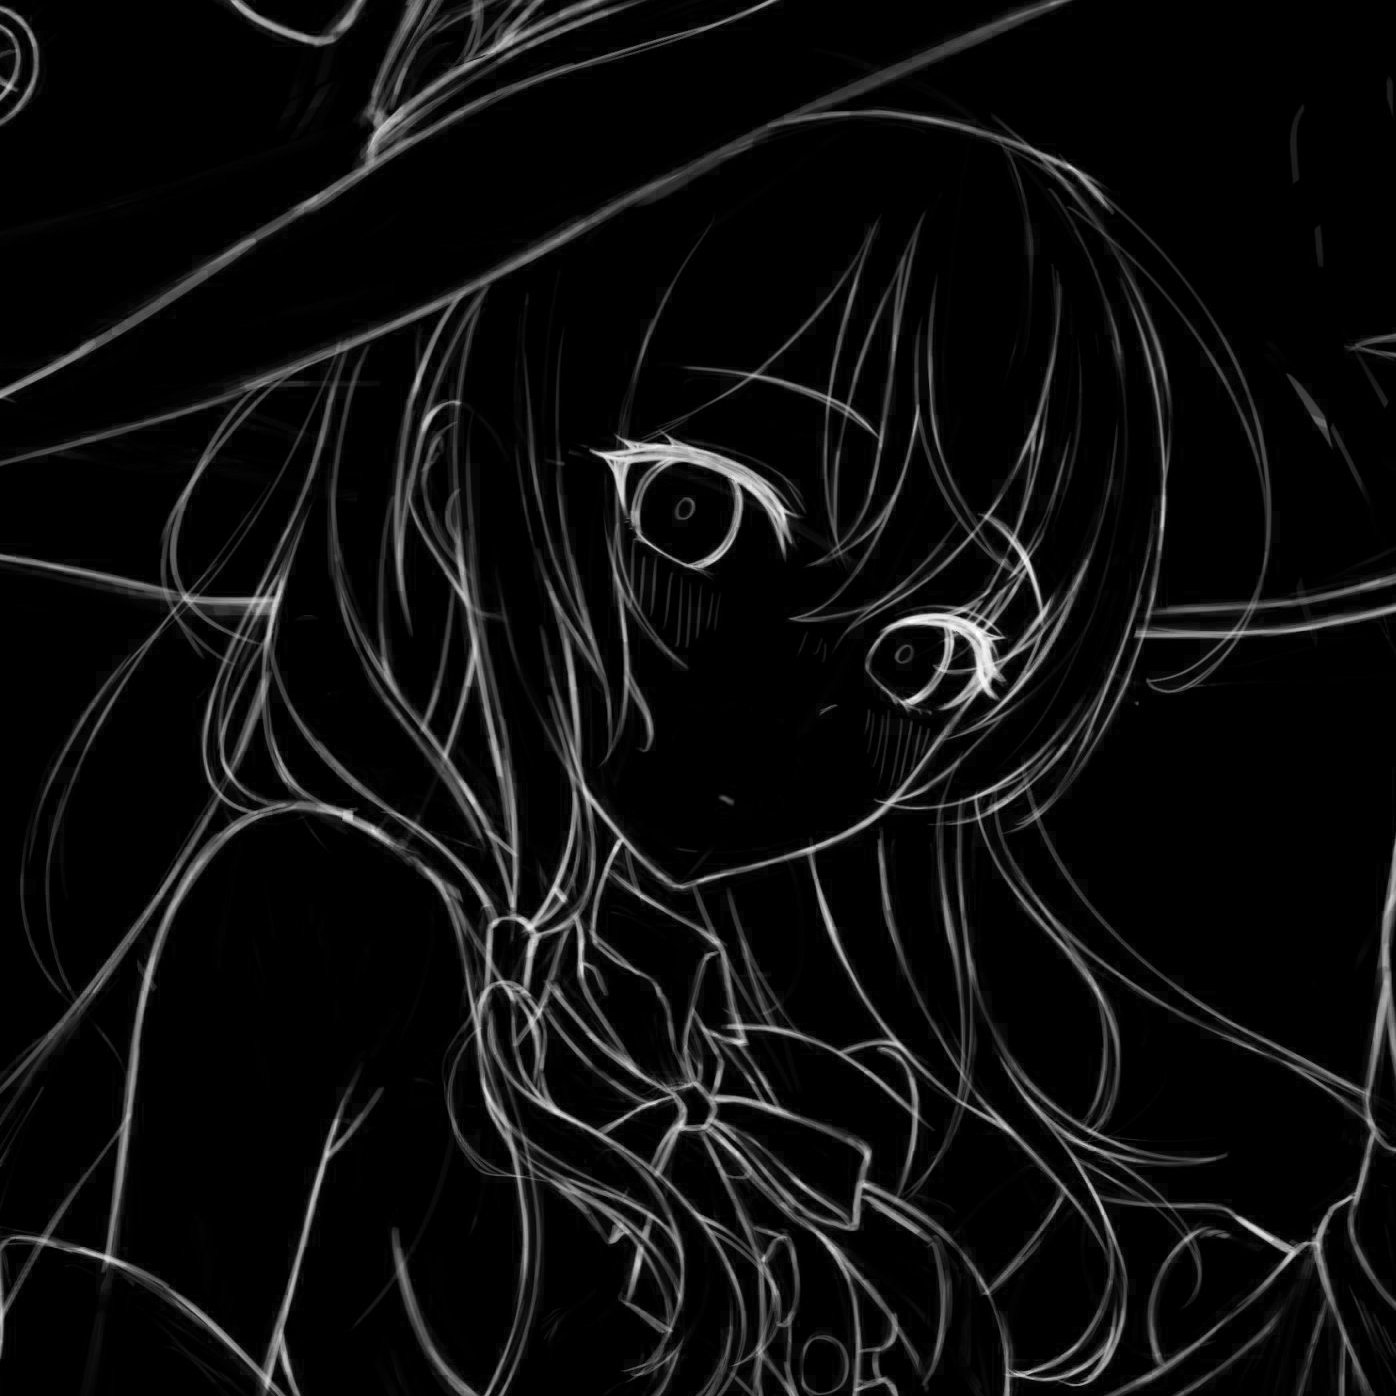 Anime Black White Images Browse 23102 Stock Photos  Vectors Free  Download with Trial  Shutterstock